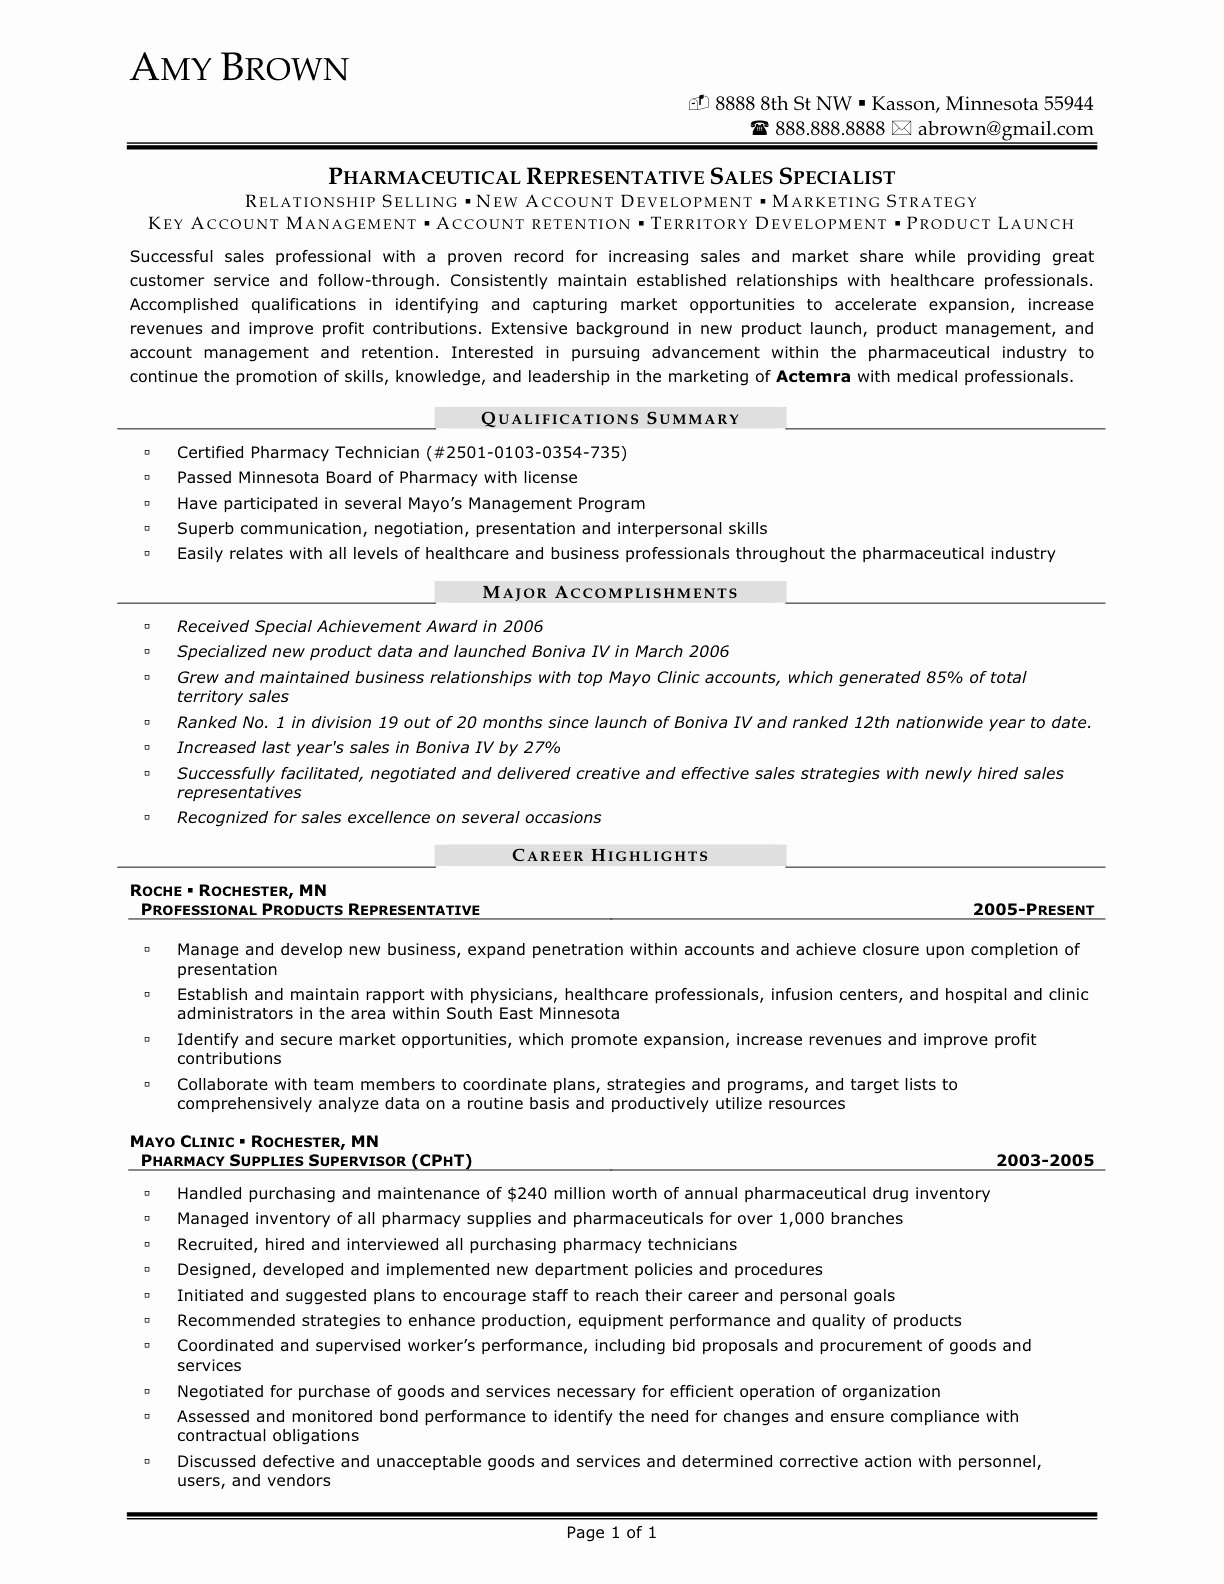 Insurance Sales Rep Resume Entry Level Objective